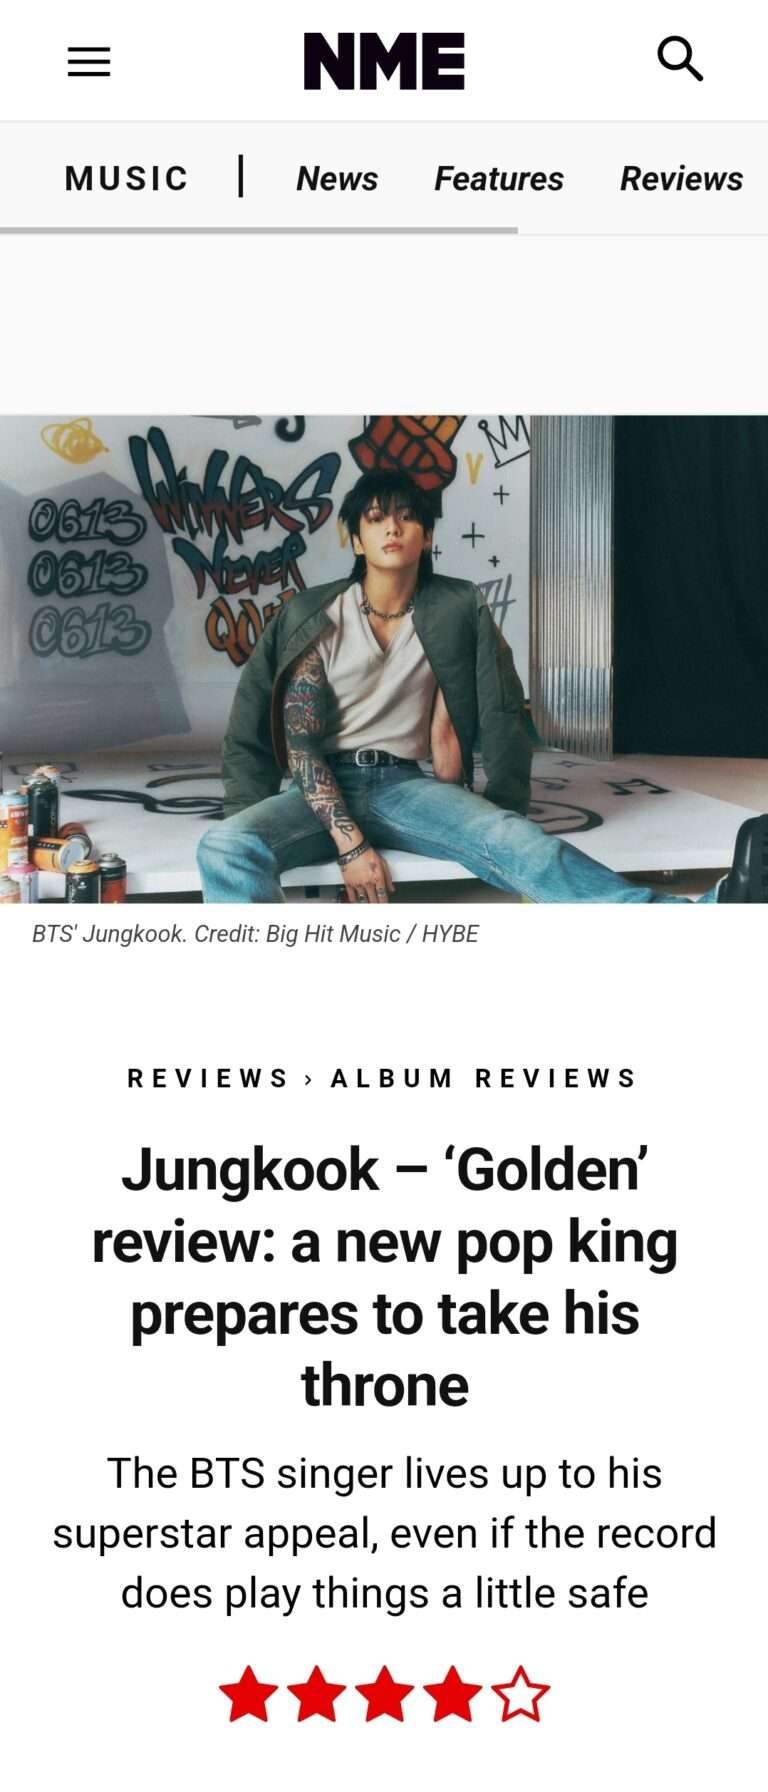 "A new pop king prepares to take his throne" BTS Jungkook's solo album 'GOLDEN' is reviewed on NME